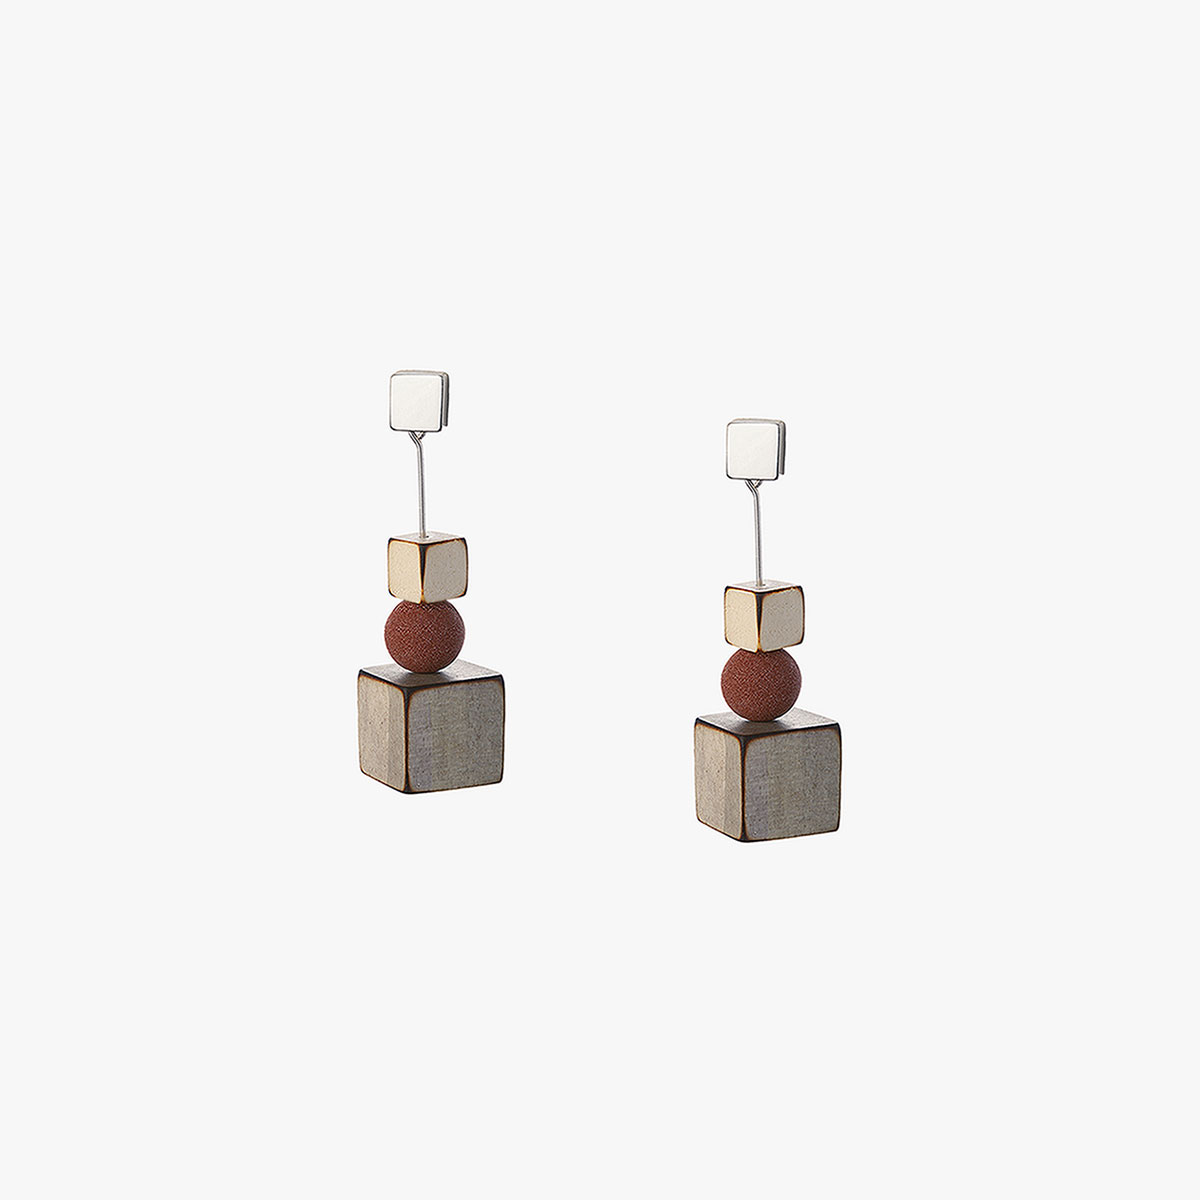 Dal handmade earrings in sterling silver, balsa wood and volcanic lava in sepia color designed by Belen Bajo